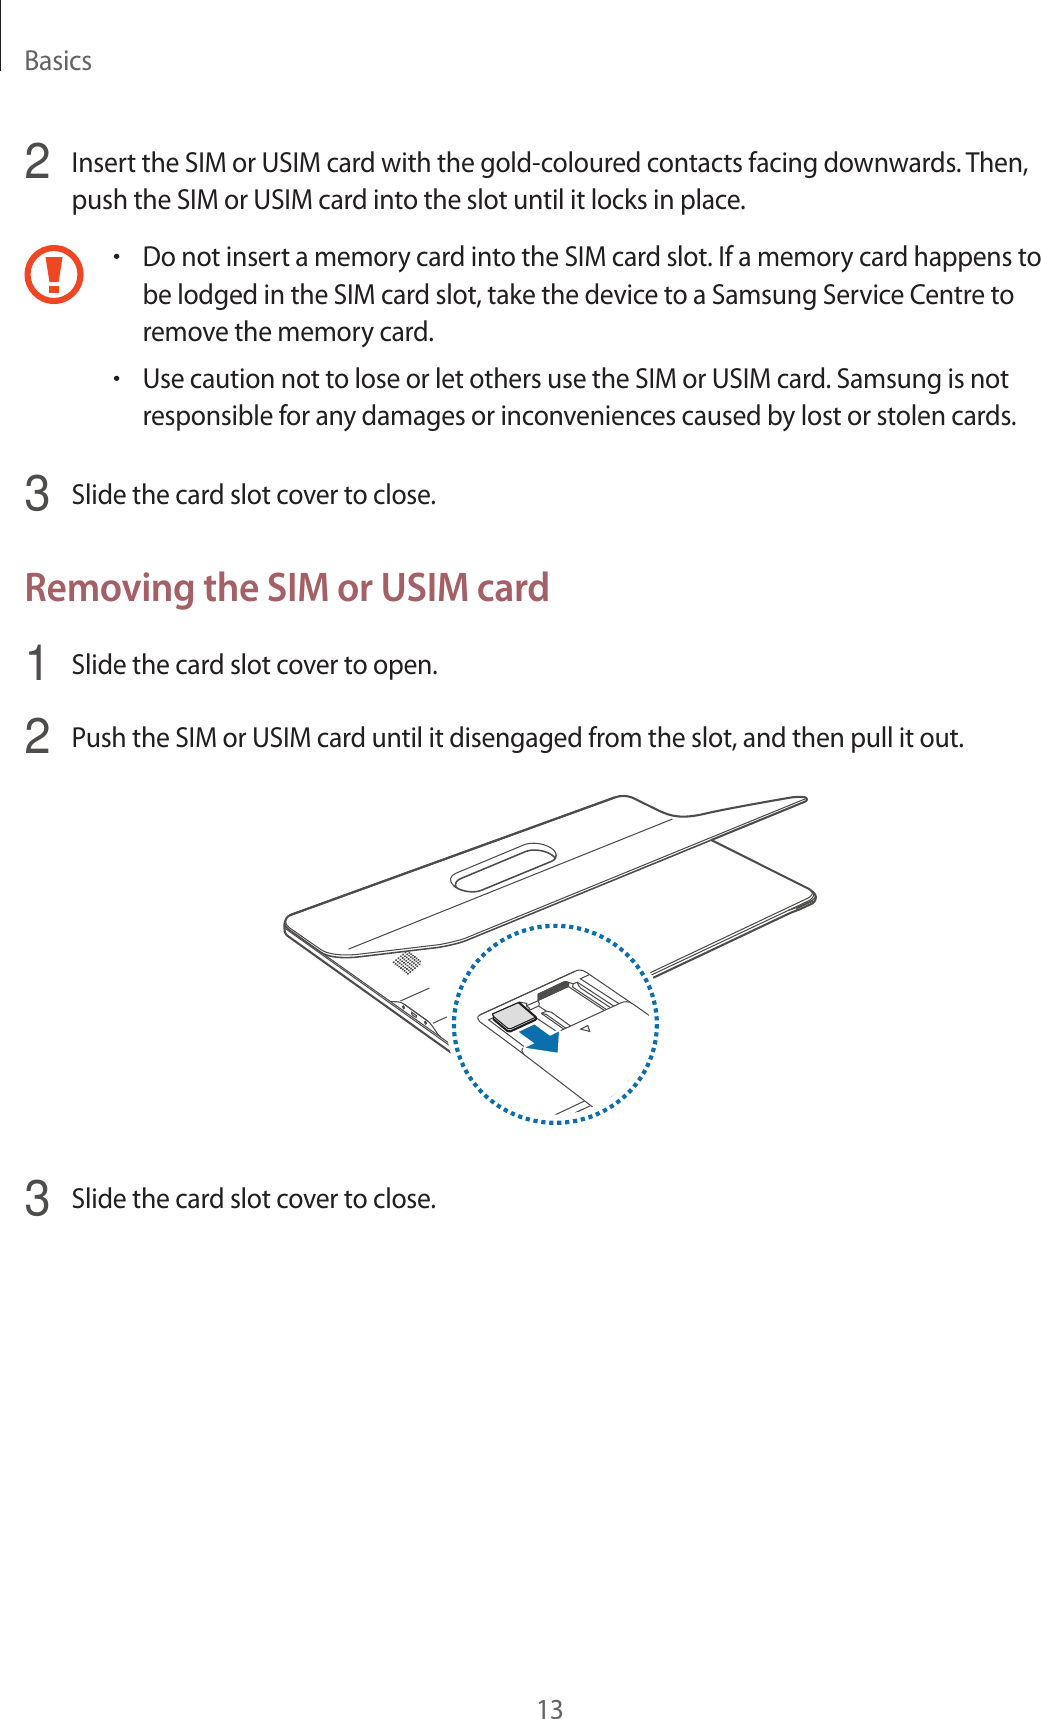 Basics132  Insert the SIM or USIM card with the gold-coloured contacts facing downwards. Then, push the SIM or USIM card into the slot until it locks in place.•Do not insert a memory card into the SIM card slot. If a memory card happens to be lodged in the SIM card slot, take the device to a Samsung Service Centre to remove the memory card.•Use caution not to lose or let others use the SIM or USIM card. Samsung is not responsible for any damages or inconveniences caused by lost or stolen cards.3  Slide the card slot cover to close.Removing the SIM or USIM card1  Slide the card slot cover to open.2  Push the SIM or USIM card until it disengaged from the slot, and then pull it out.3  Slide the card slot cover to close.